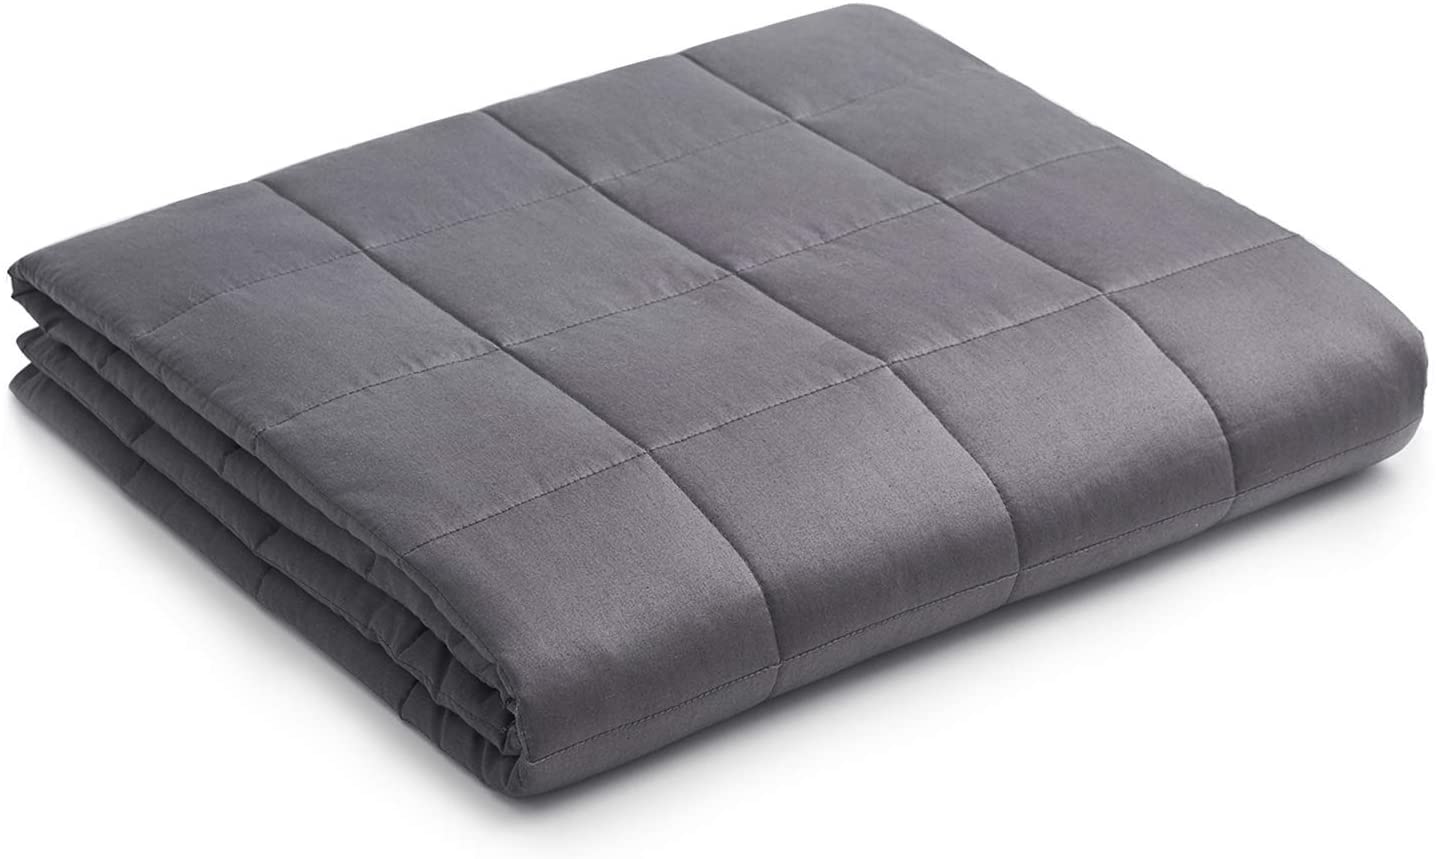 YnM weighted blankets